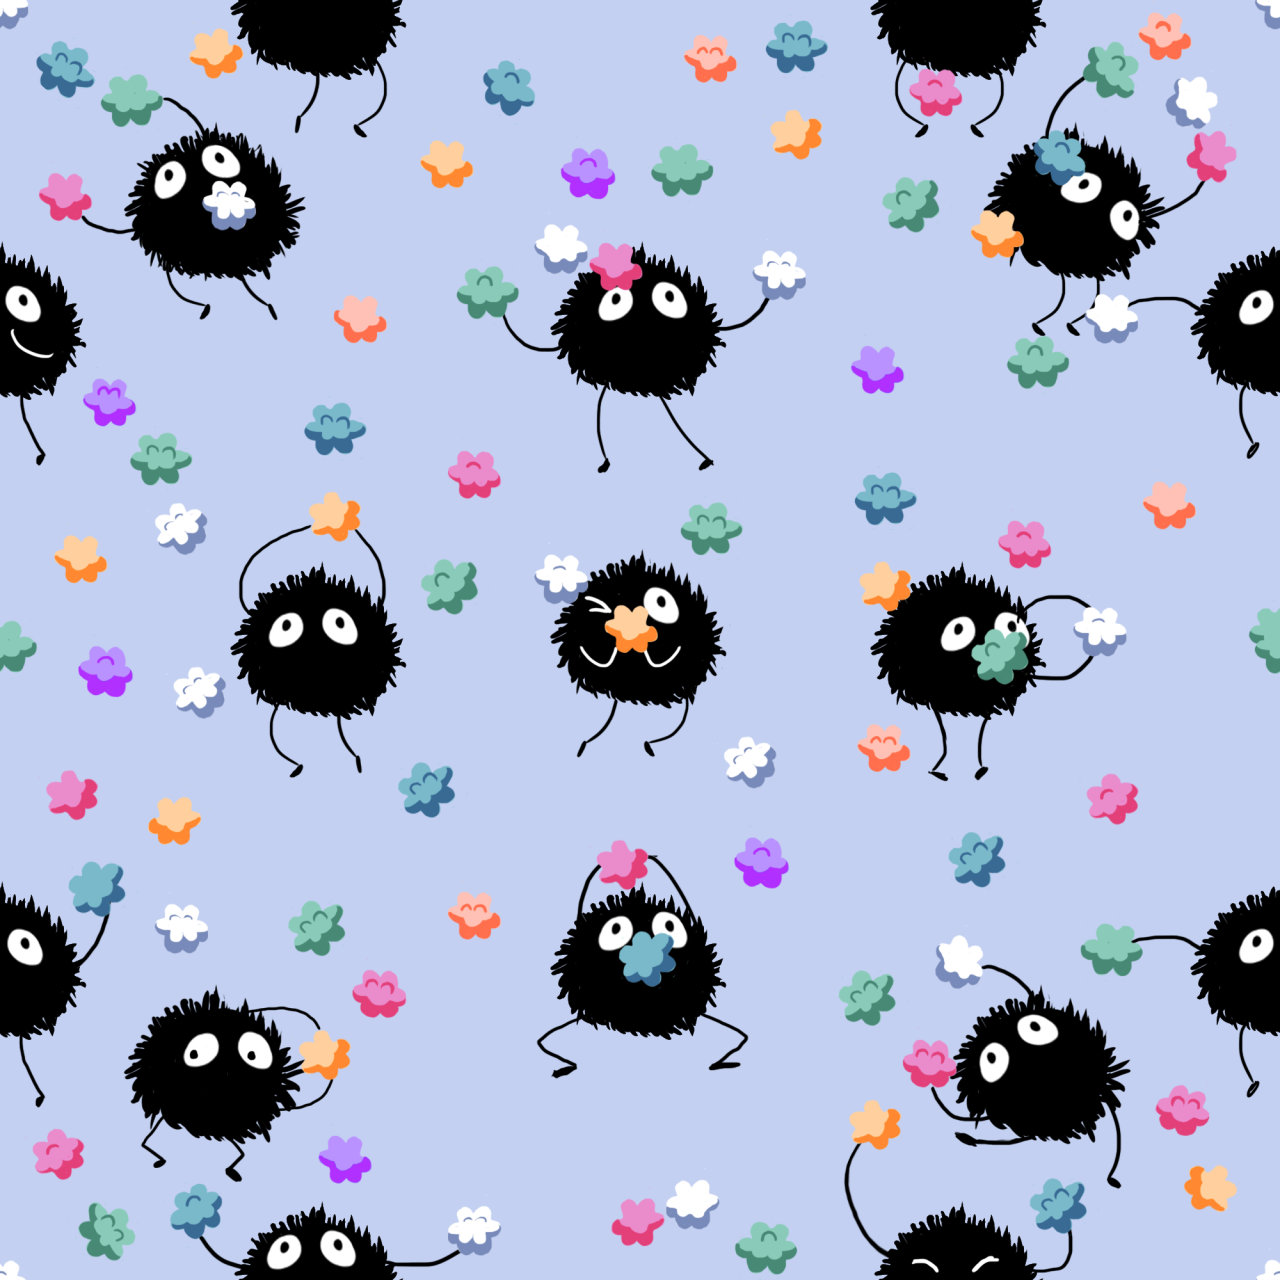 — Soot sprite and konpeito seamless wallpaper. They